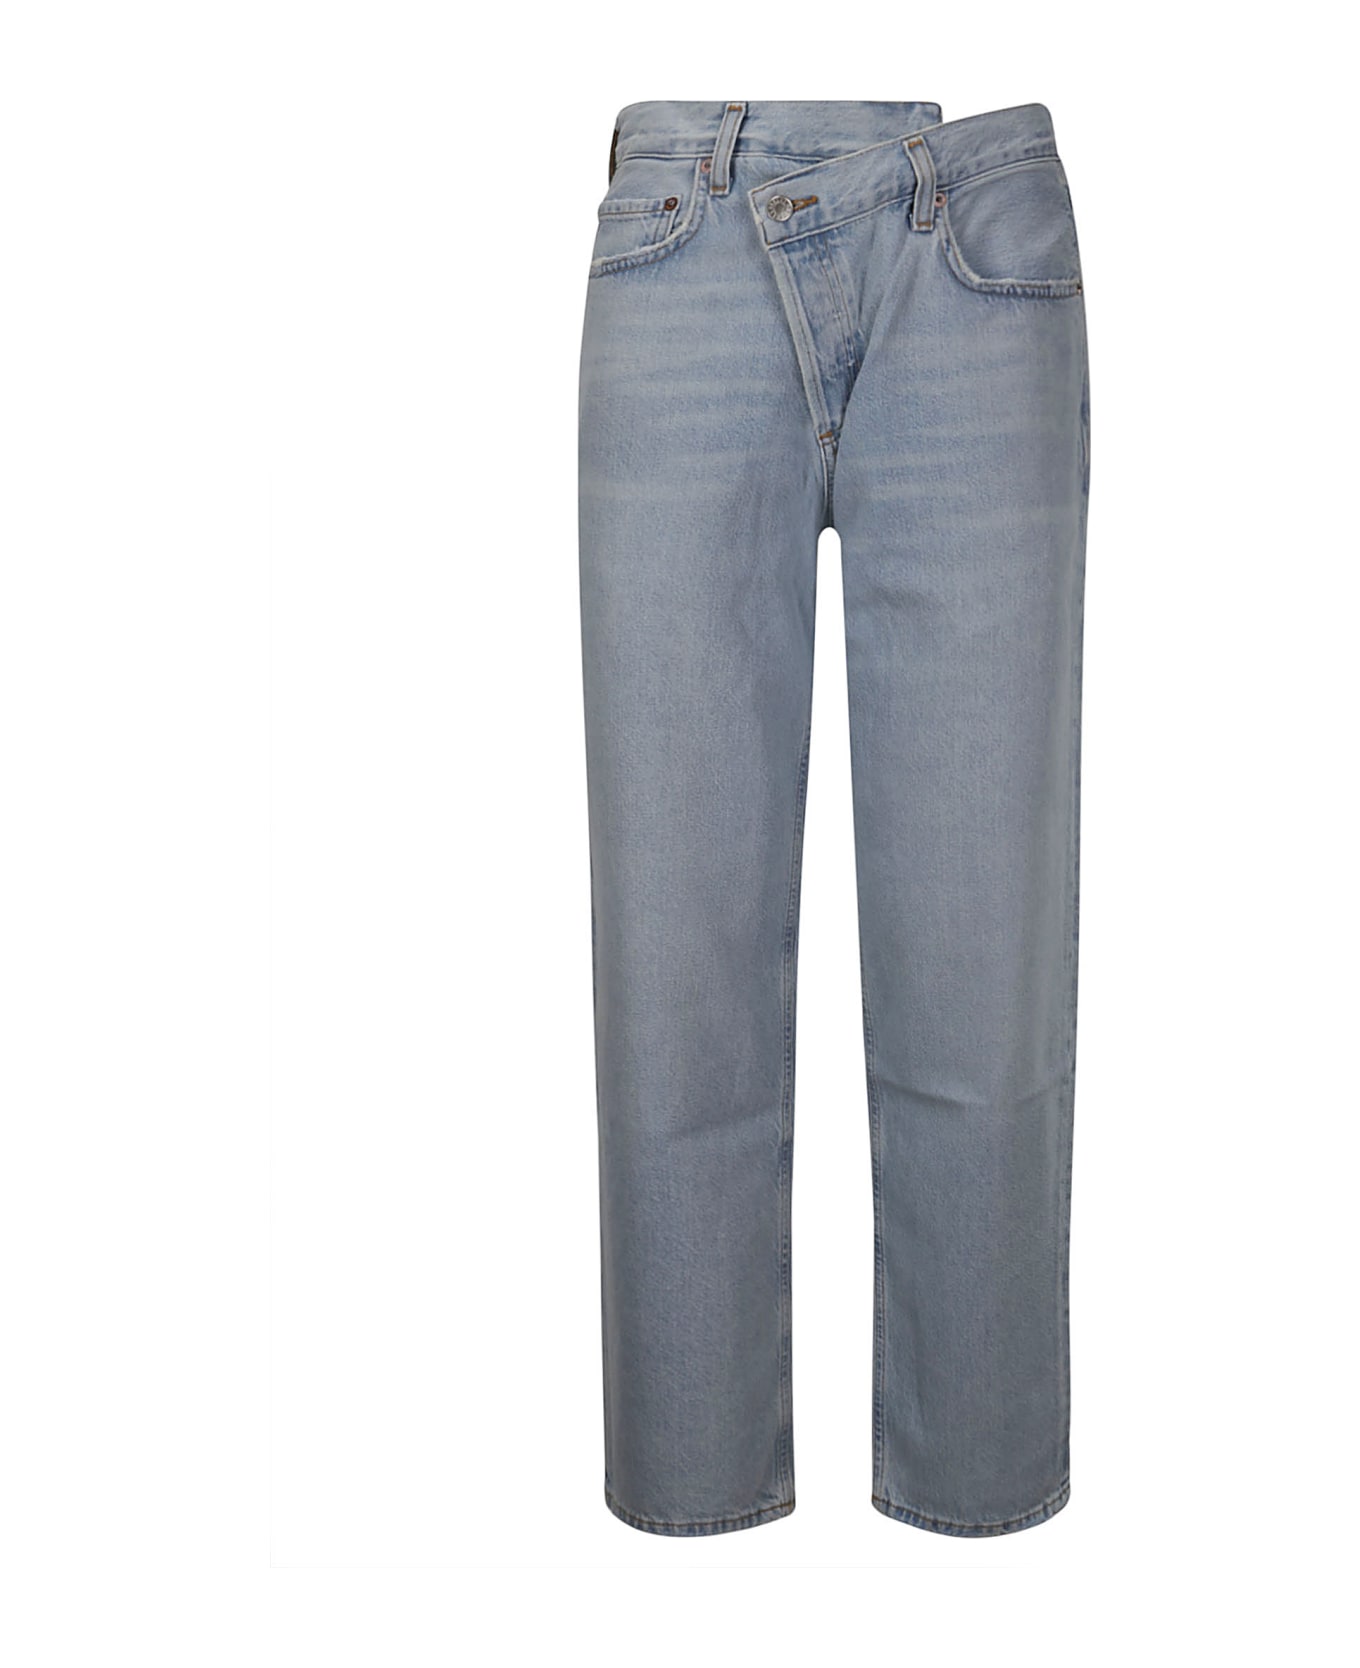 AGOLDE Criss Cross Jean In Wired - WIRED (LT VINT IND)